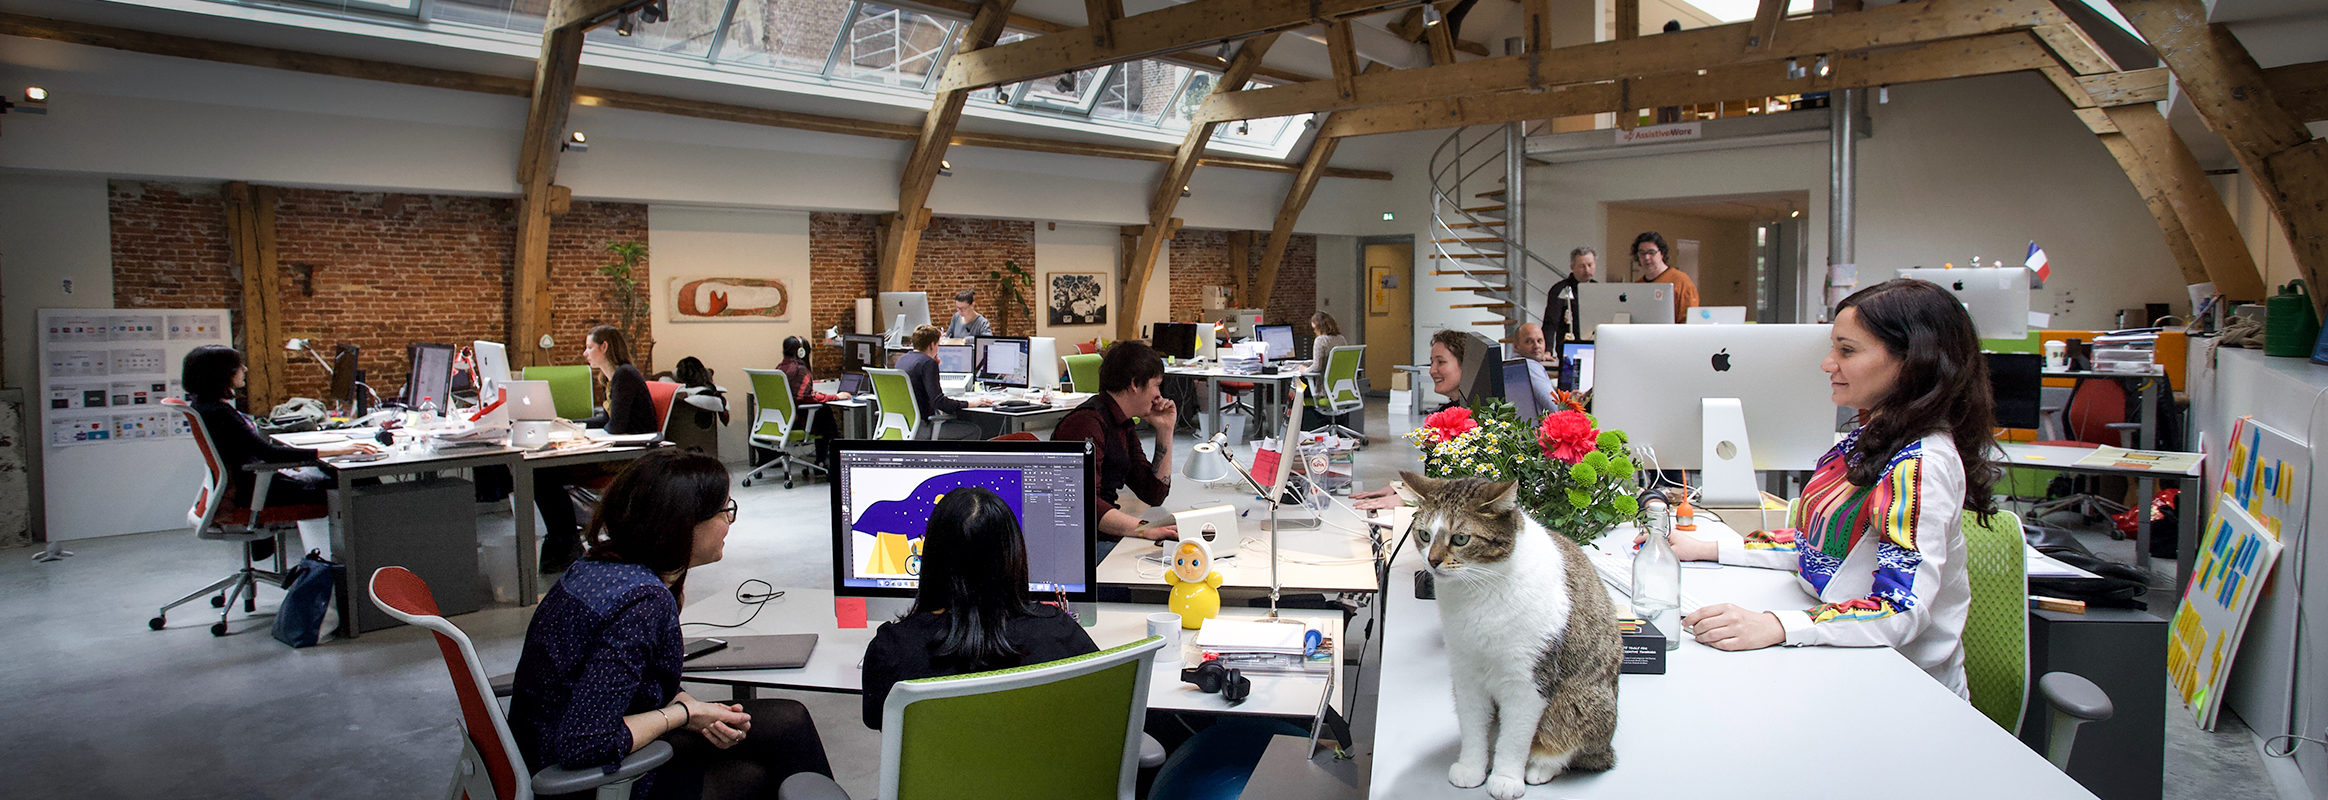 AssistiveWare's spacious office in daylight entering through skylights. People are sitting and standing at desks. Starsky, one of the two office cats, sits prominently on the table closest to the camera.